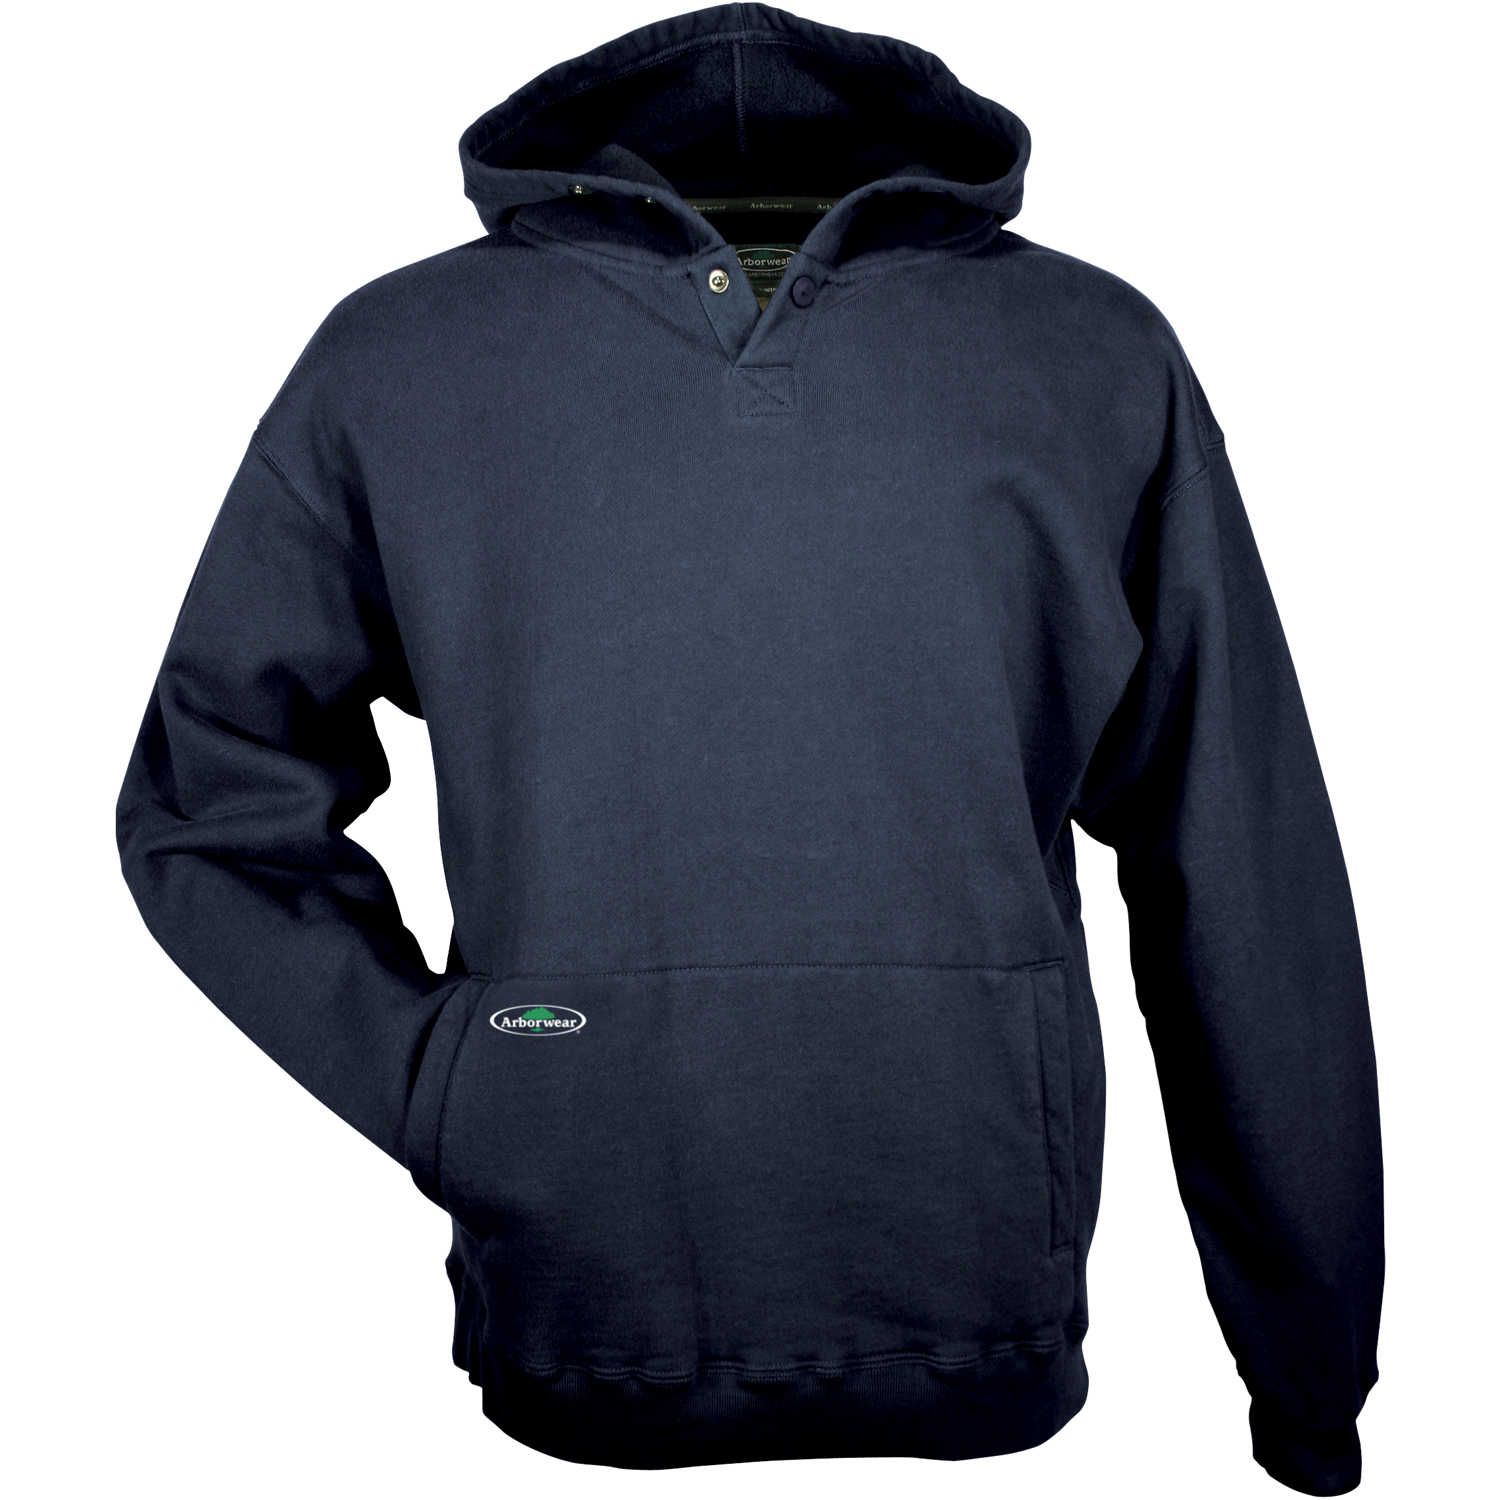 Arborwear Hooded DoubleThick Pullover Sweatshirts | Forestry Suppliers ...